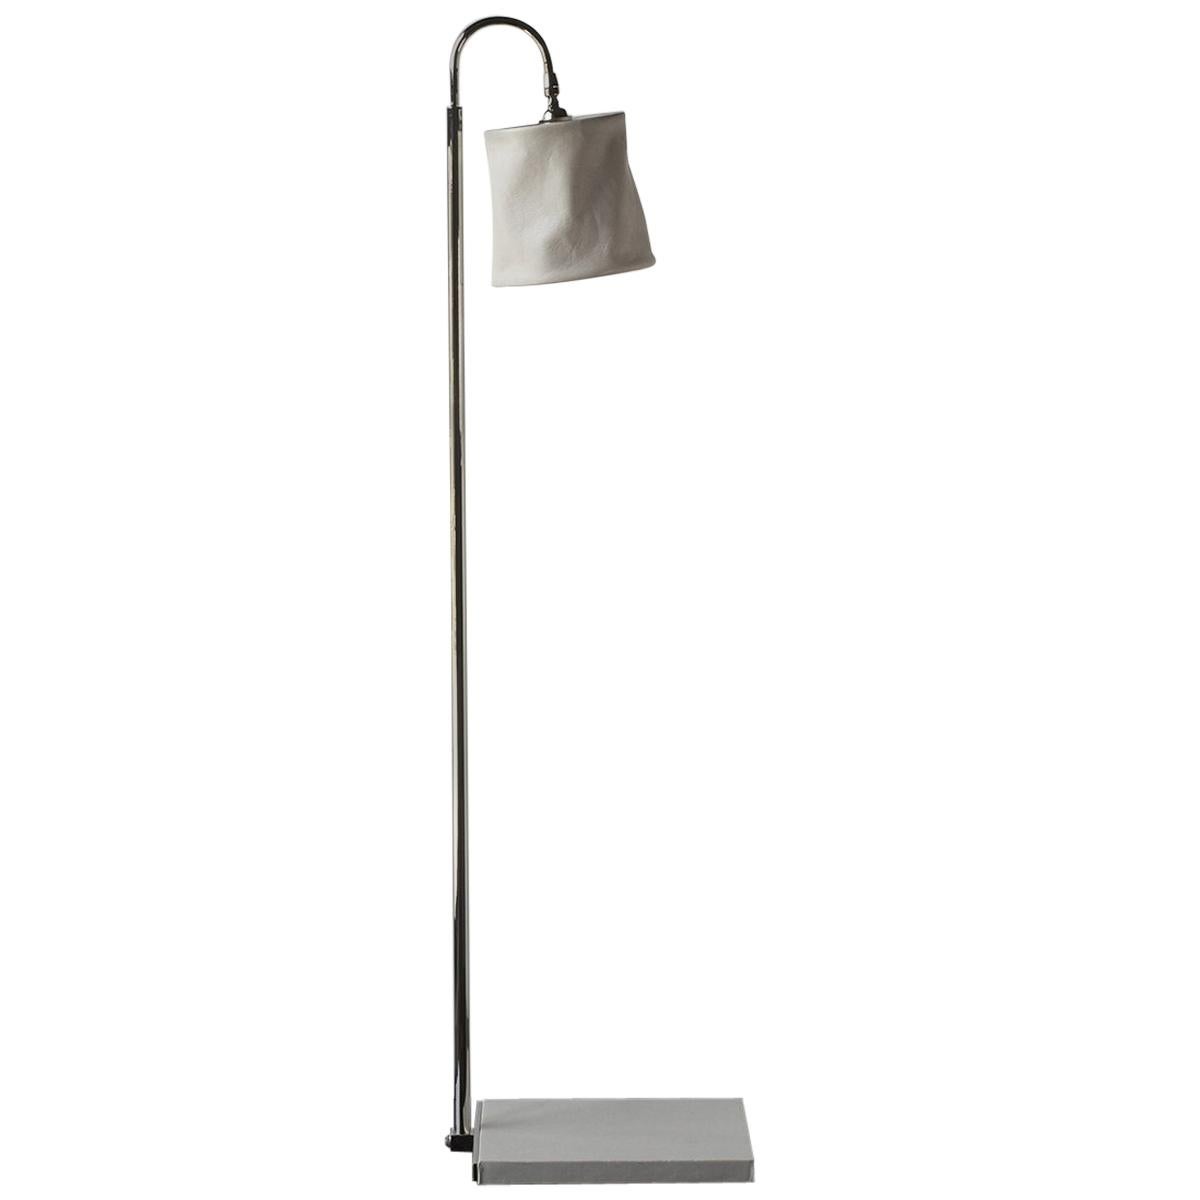 Series01 Floor Lamp, Hand-Dyed Ash ‘Gray’ Leather, Polished Nickel-Plated Brass For Sale